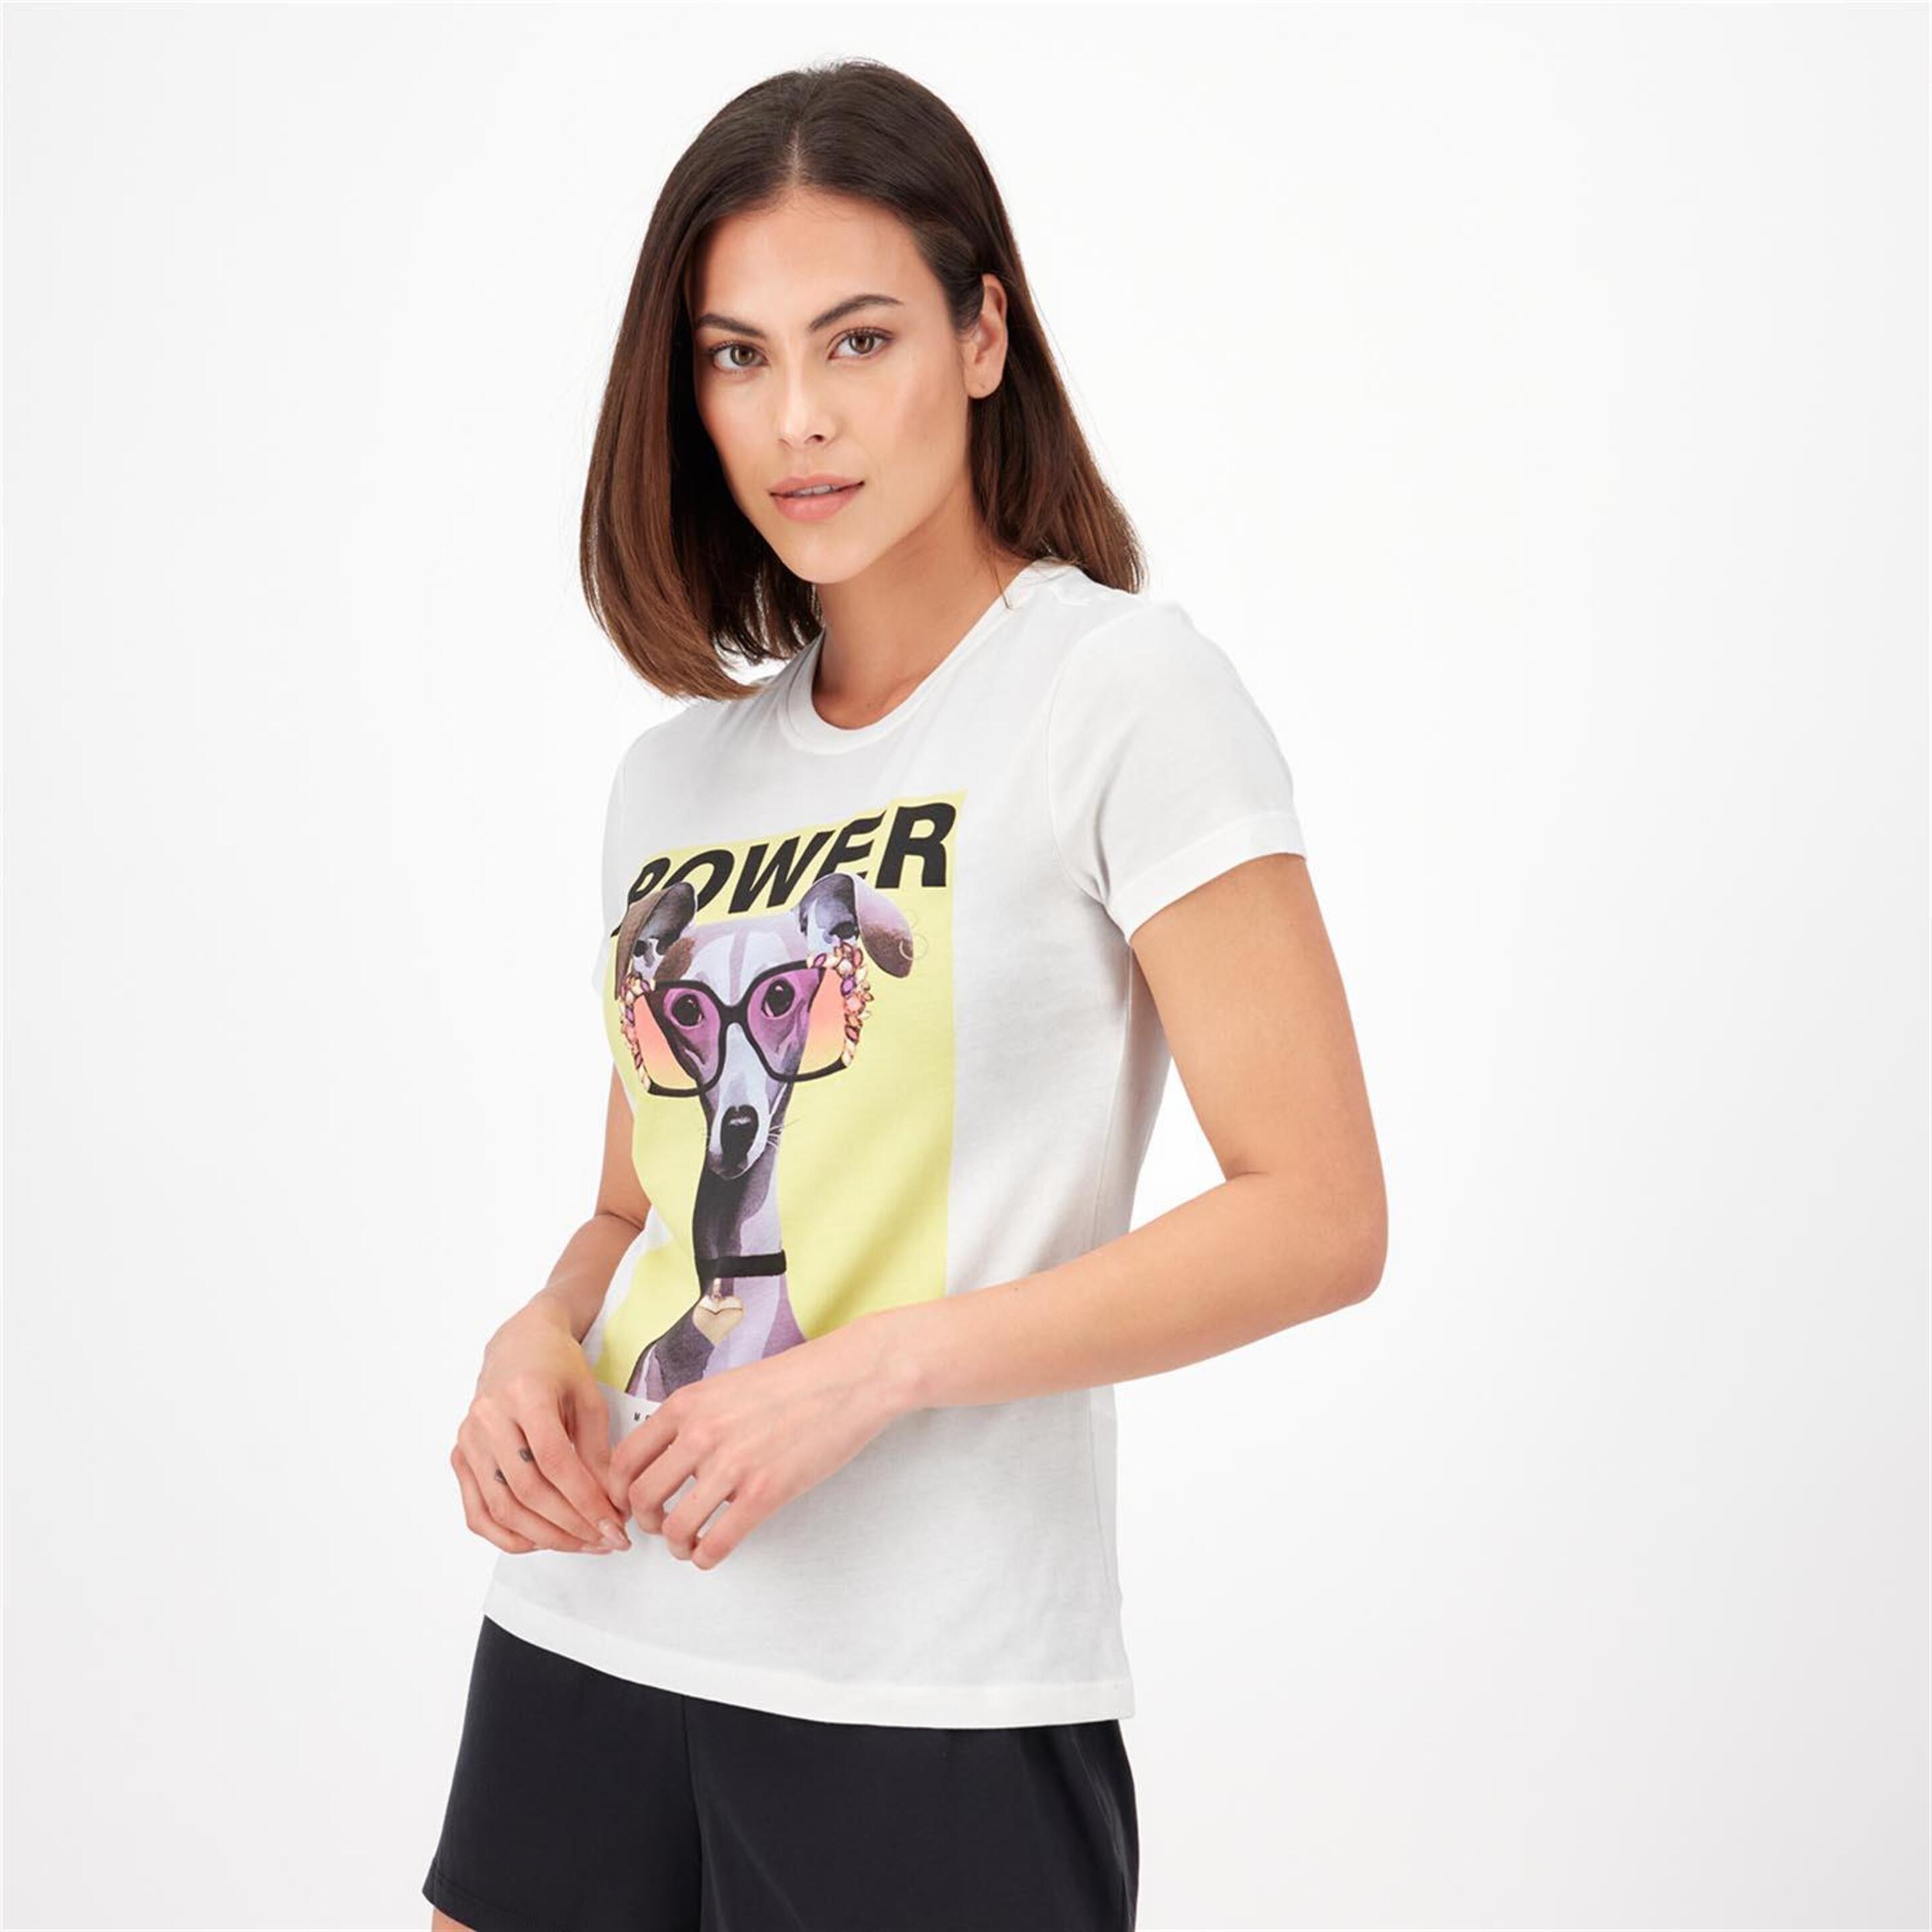 ONLY Perro - Blanco - Camiseta Mujer